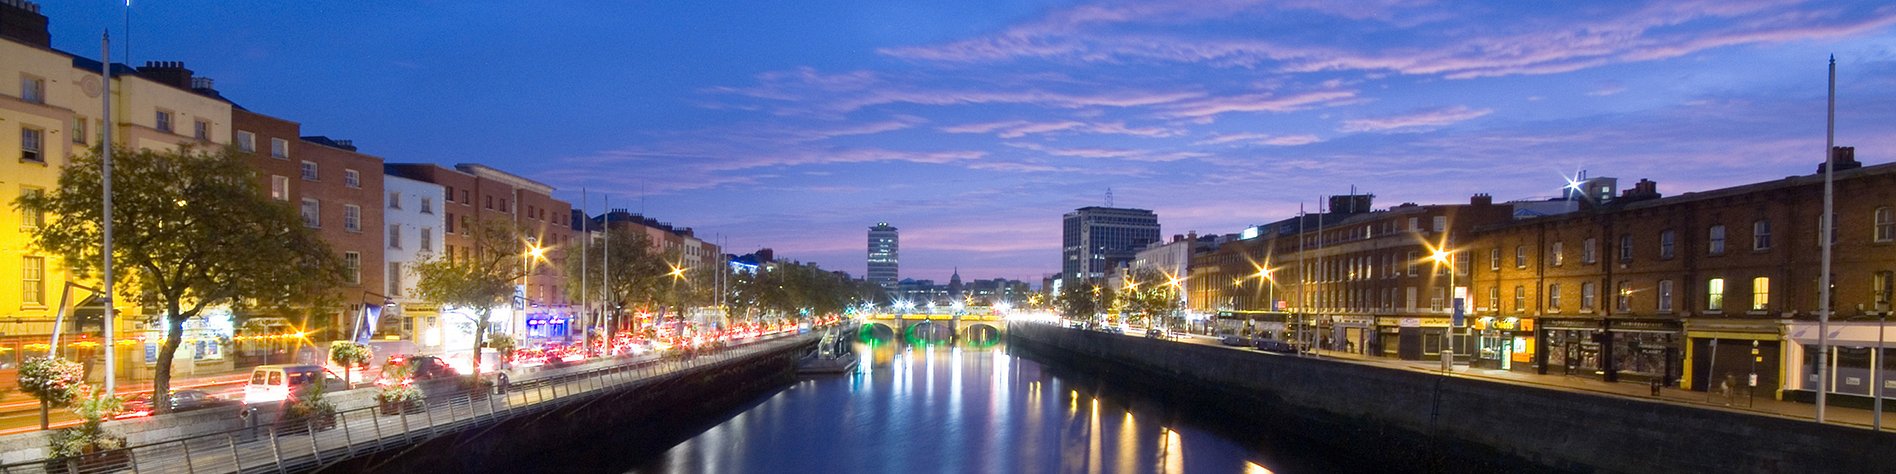 Dublin by Night - 10 Best Things to Do After Dark not Involving Alcohol